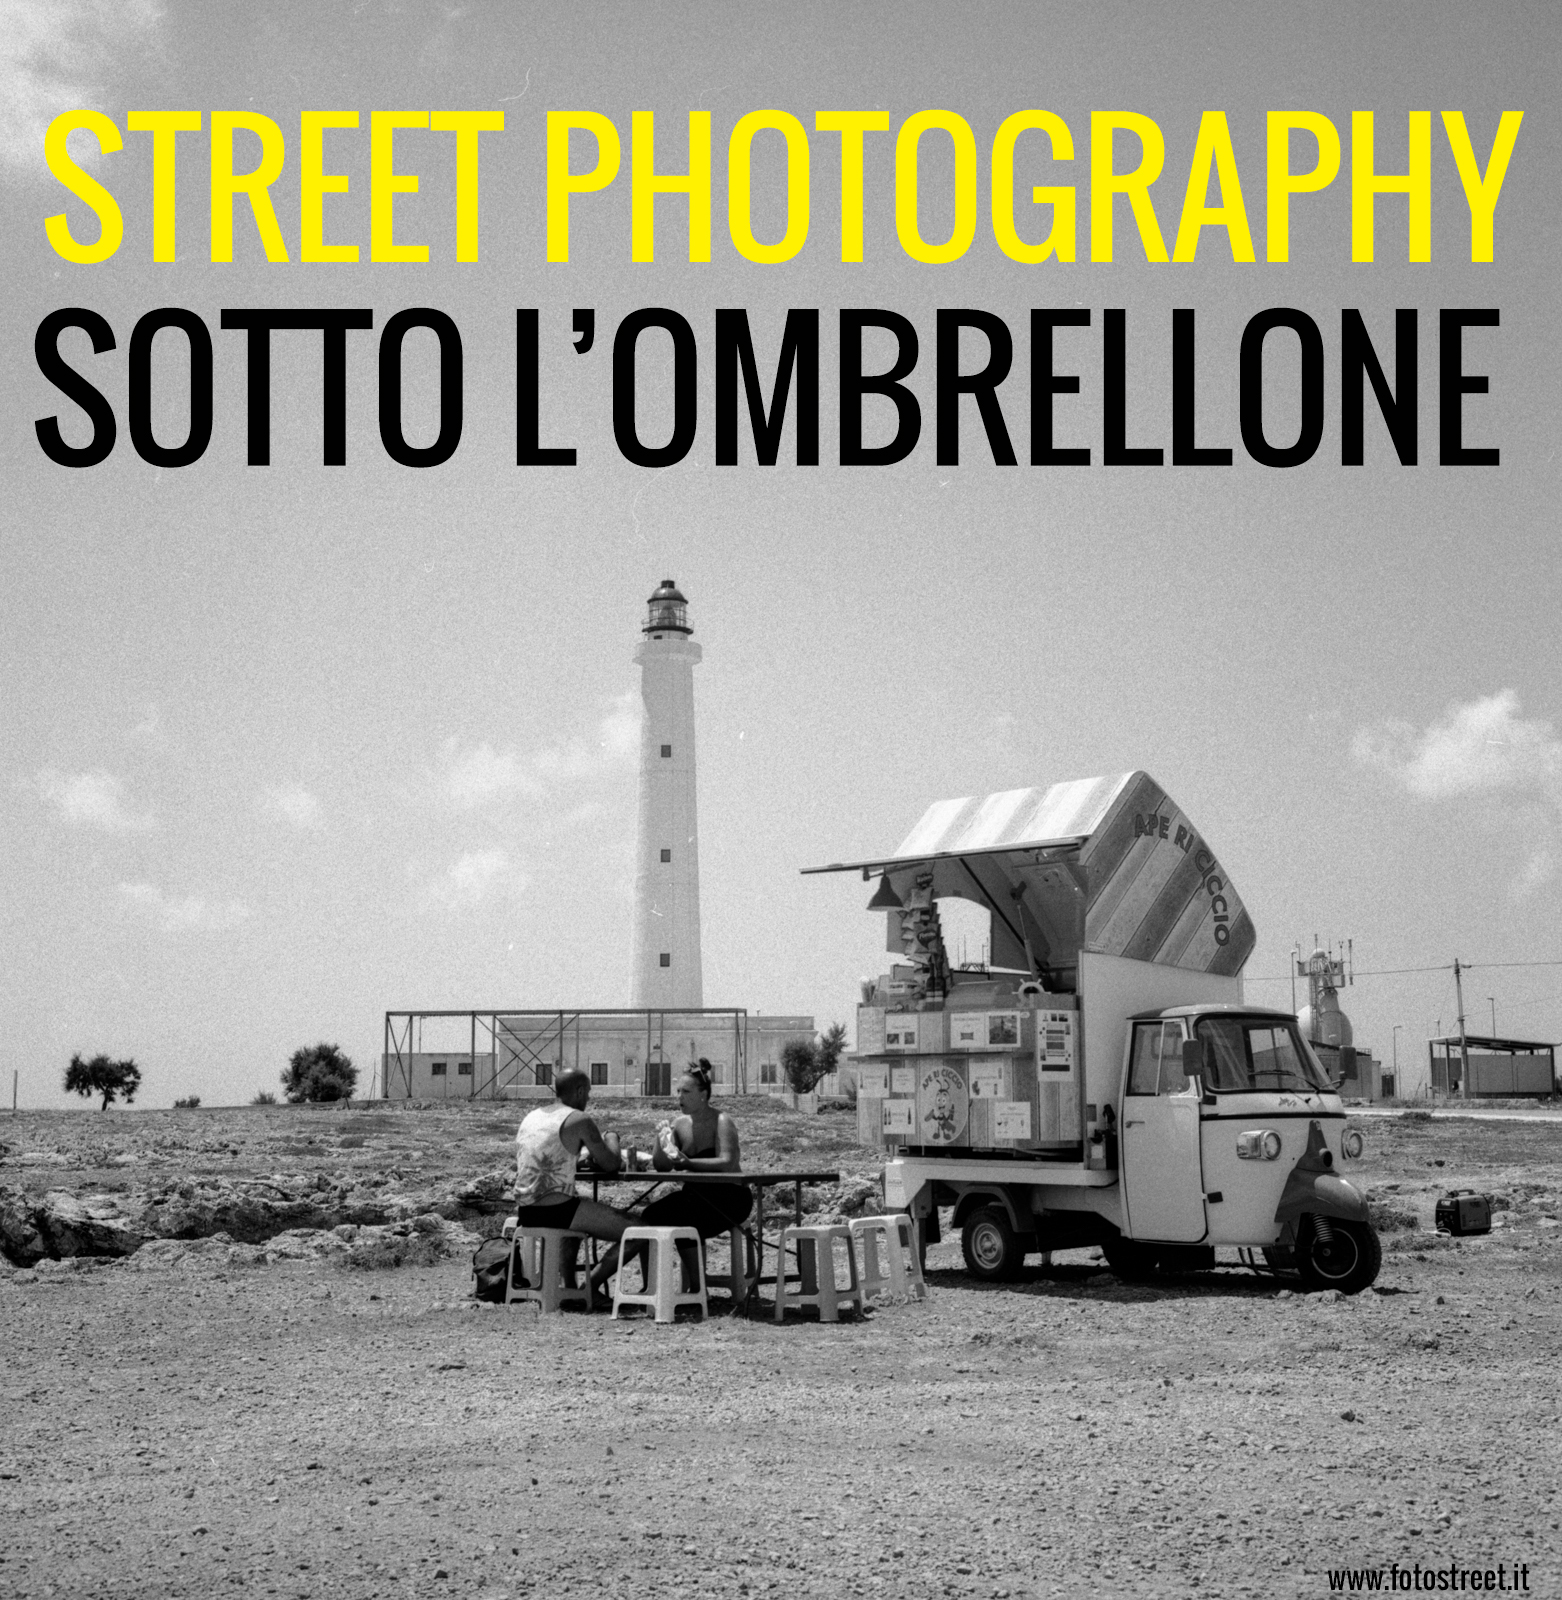 Street photography sotto l’ombrellone